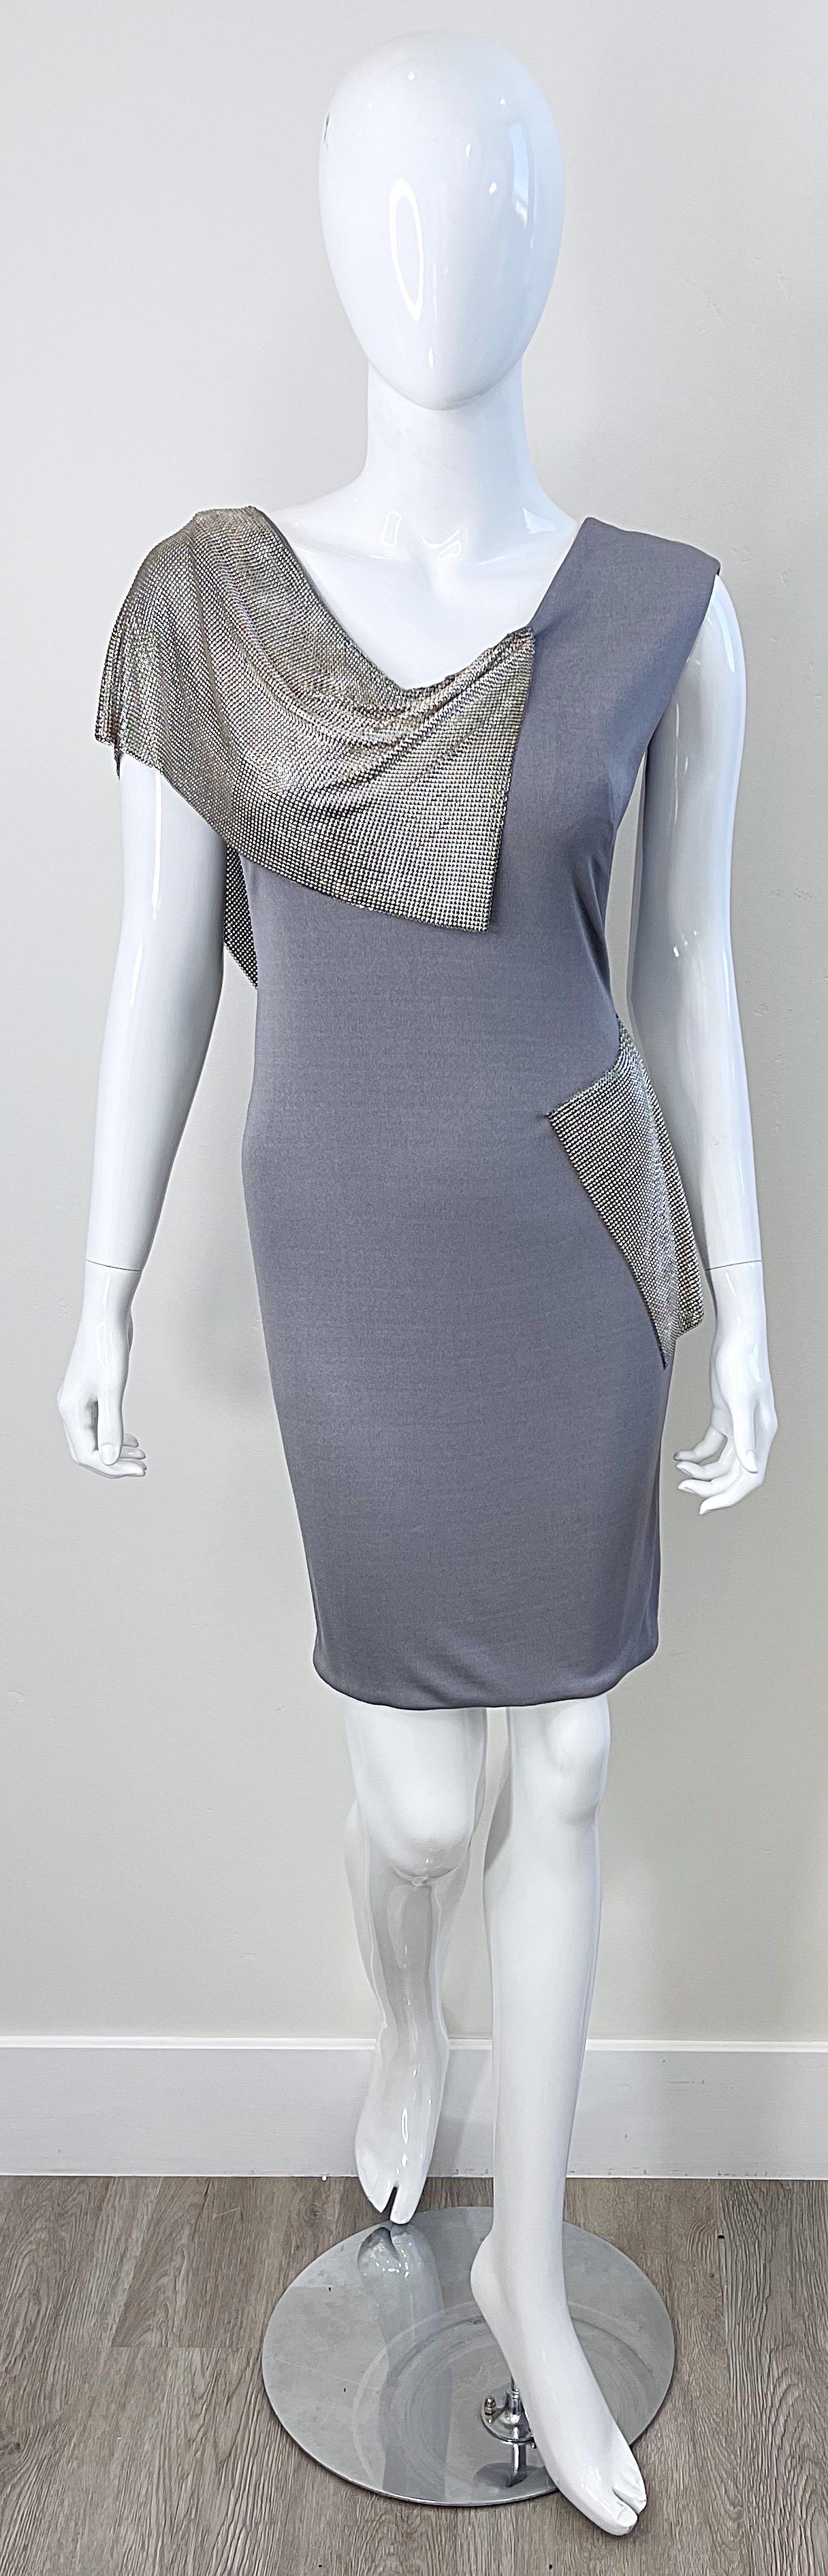 CD Greene 2000s Grey Silver Chainmail Cut-Out Silk Jersey Y2K Vintage Dress For Sale 3